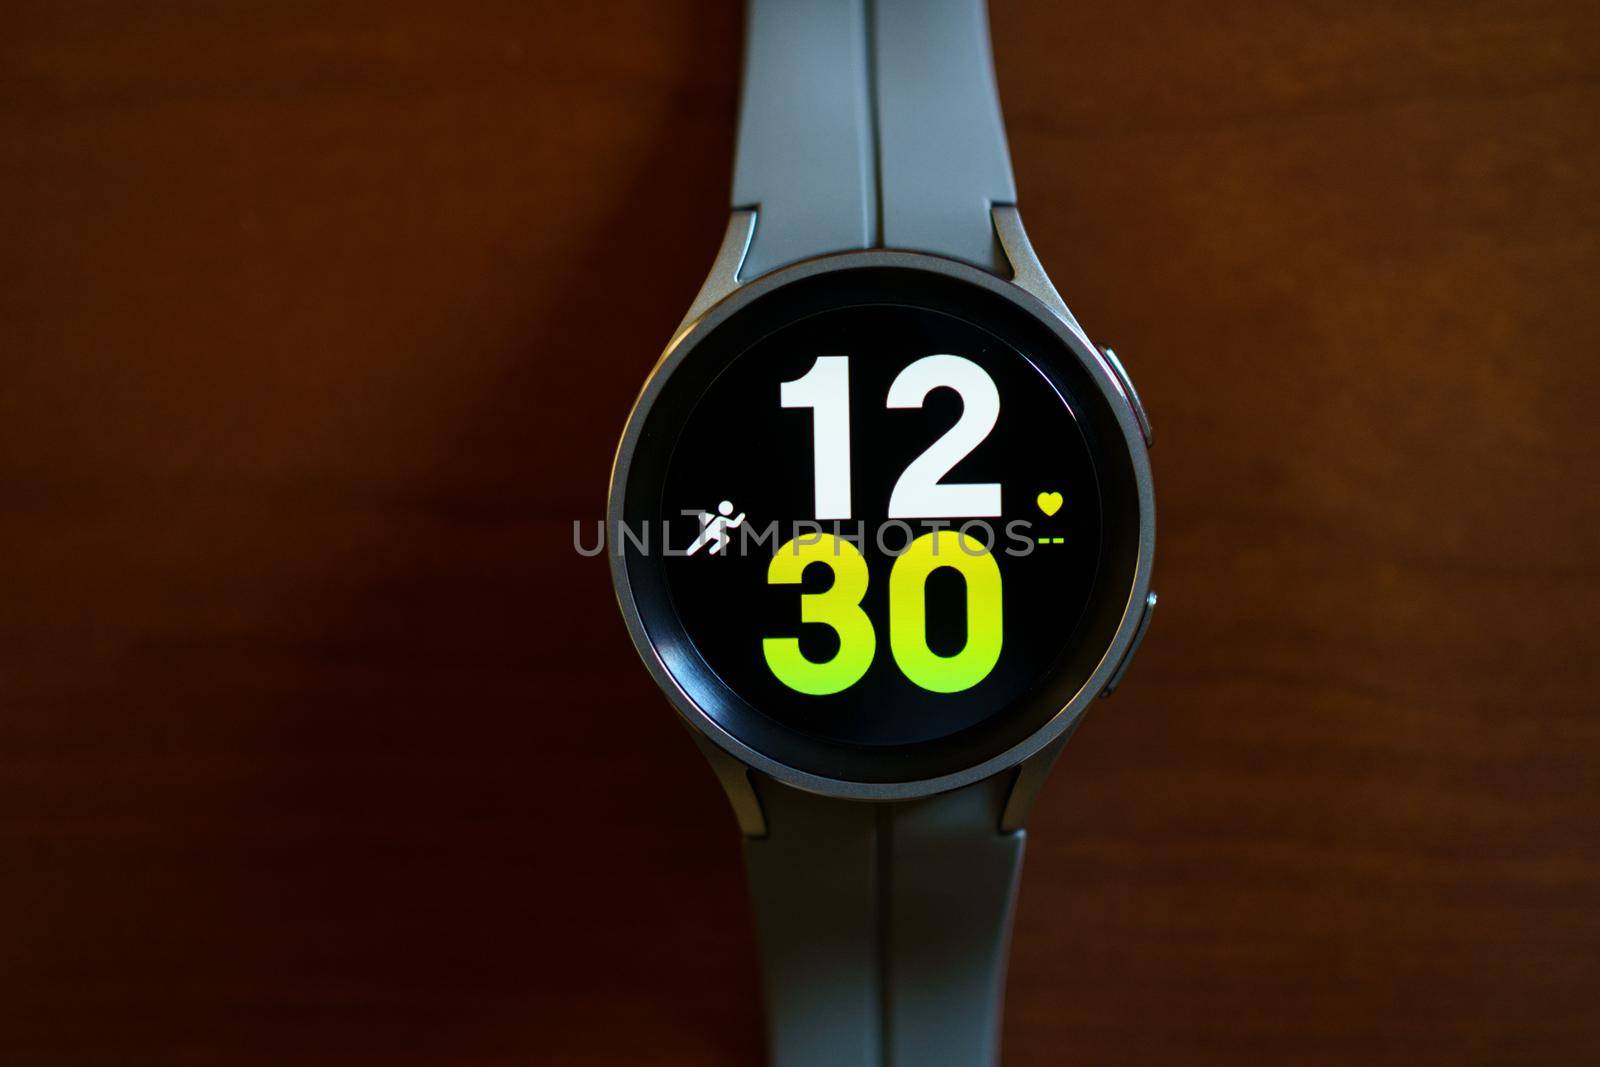 Granada, Andalusia, Spain - September 28th, 2022: New Samsung Watch 5 Pro in its box with different watch faces .